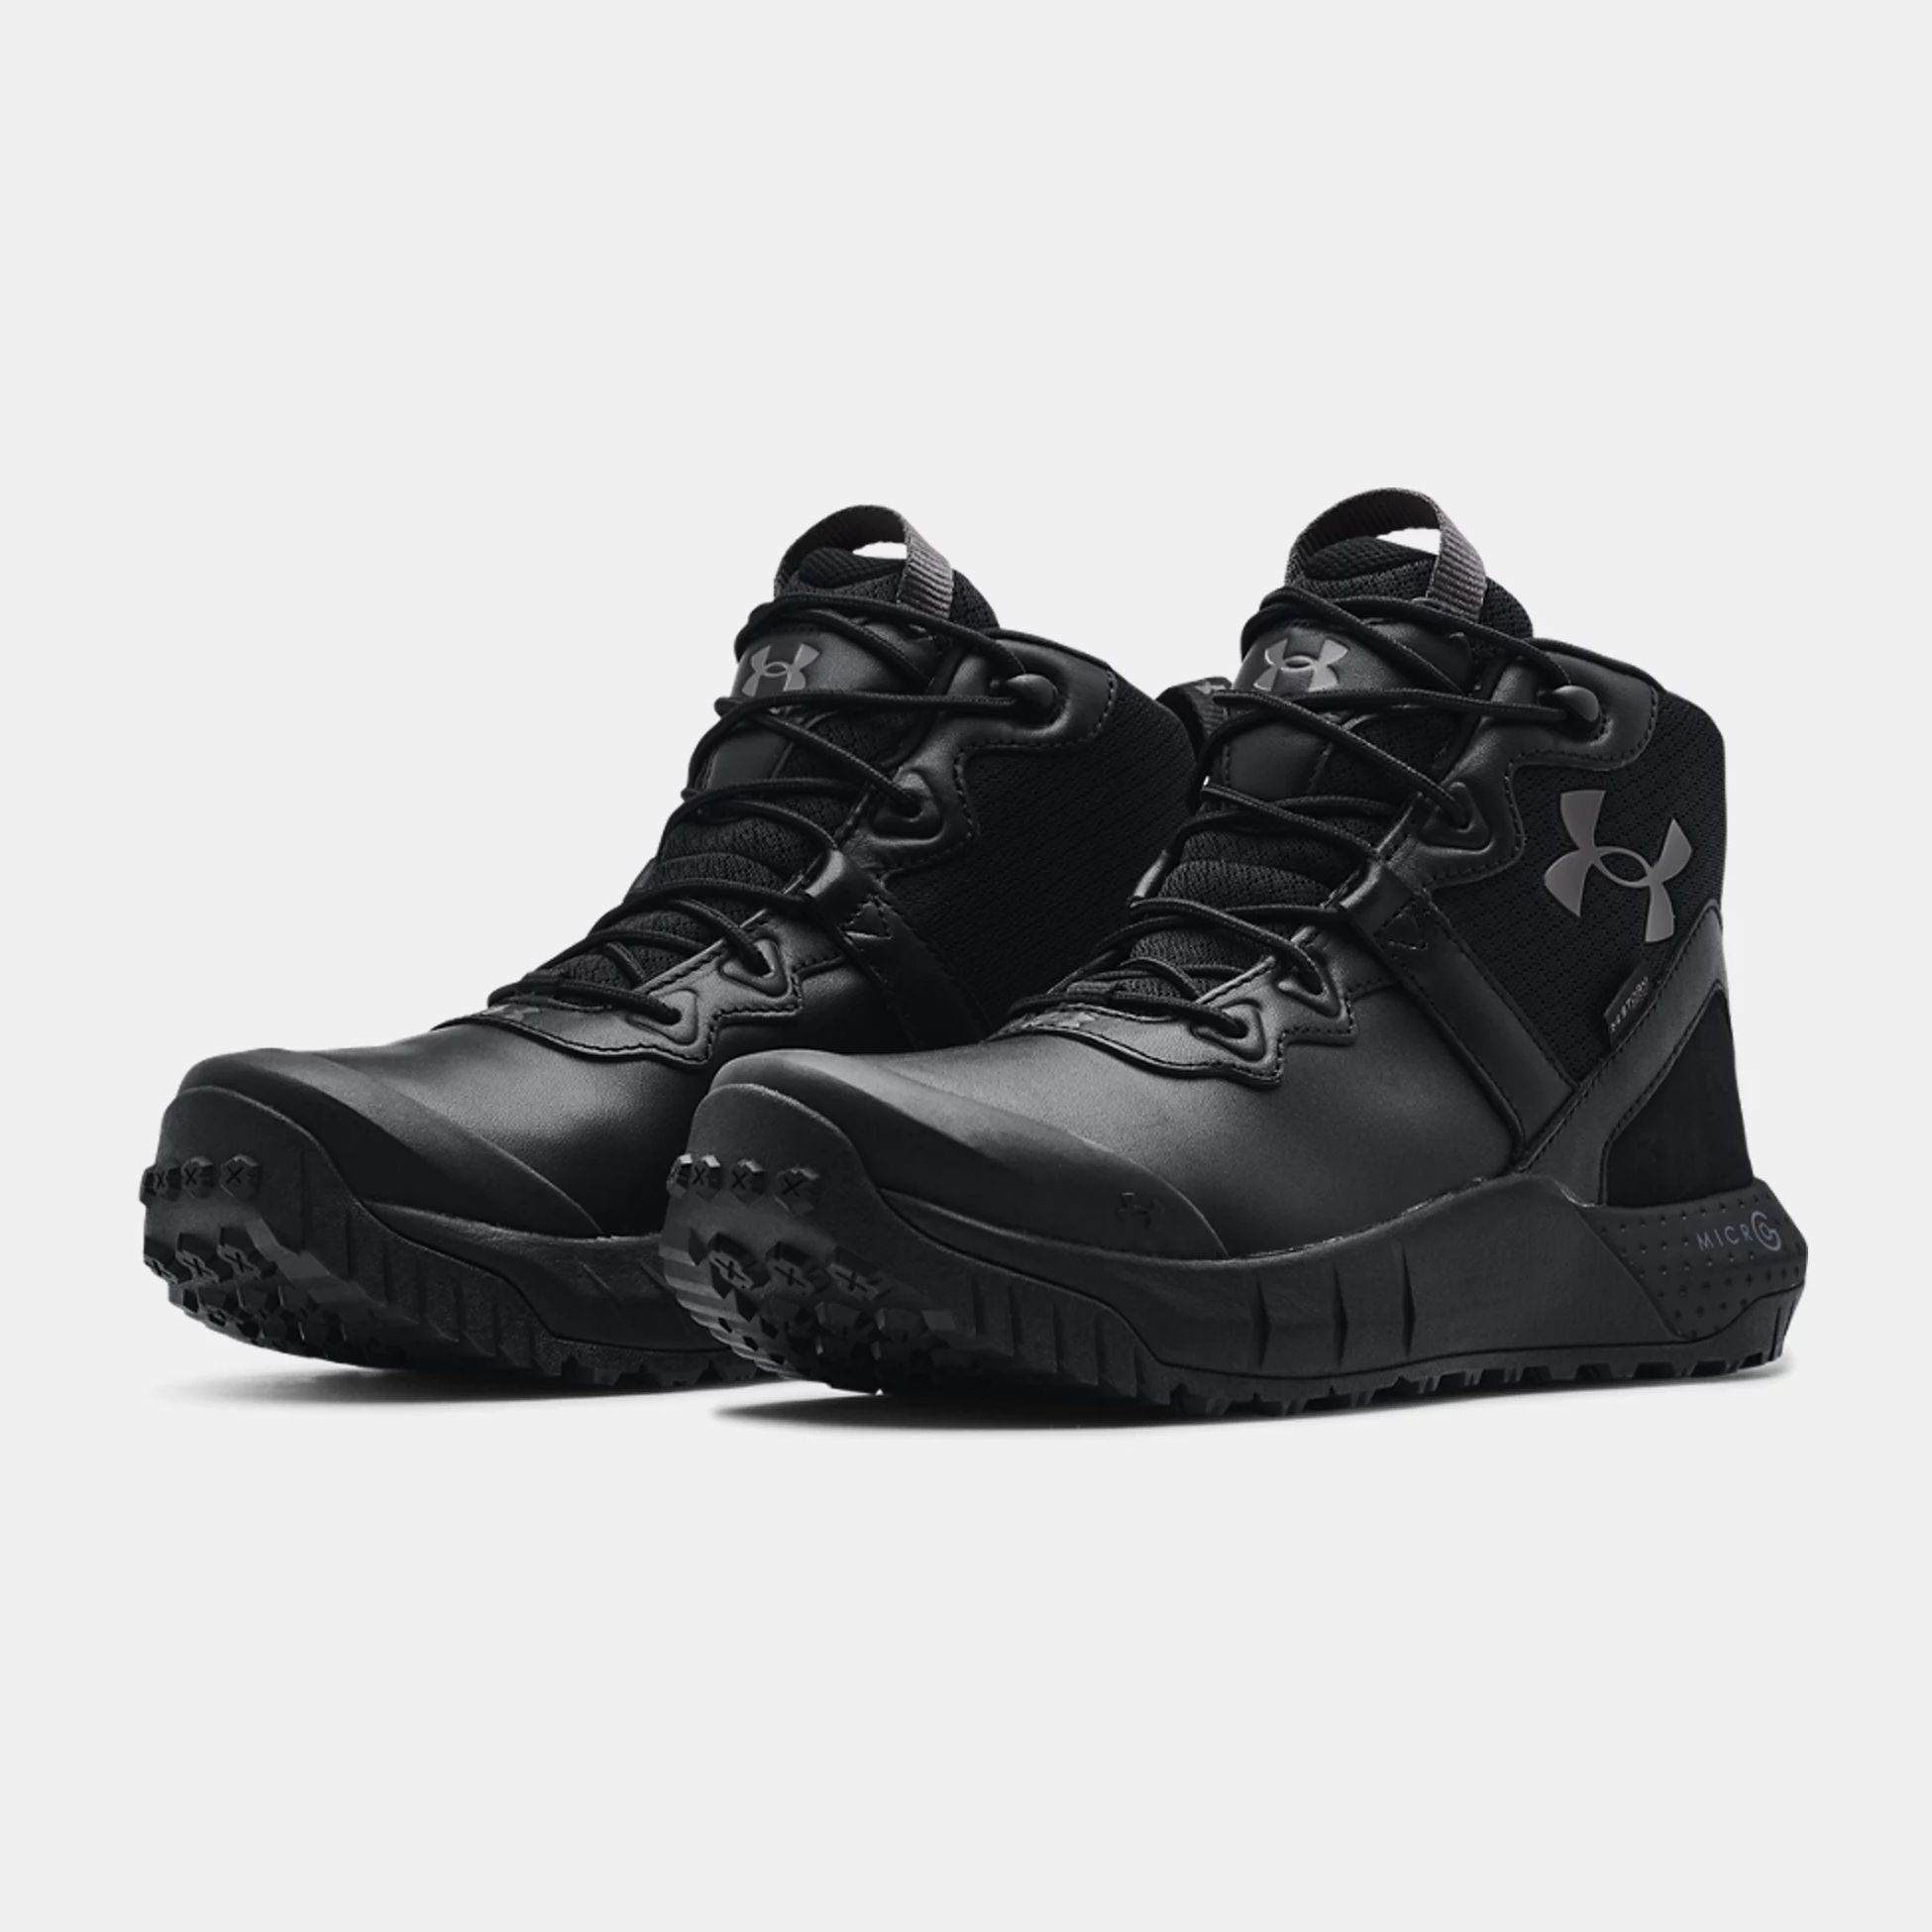 Outdoor Shoes -  under armour UA Micro G Valsetz Mid Leather WP Tactical Boots